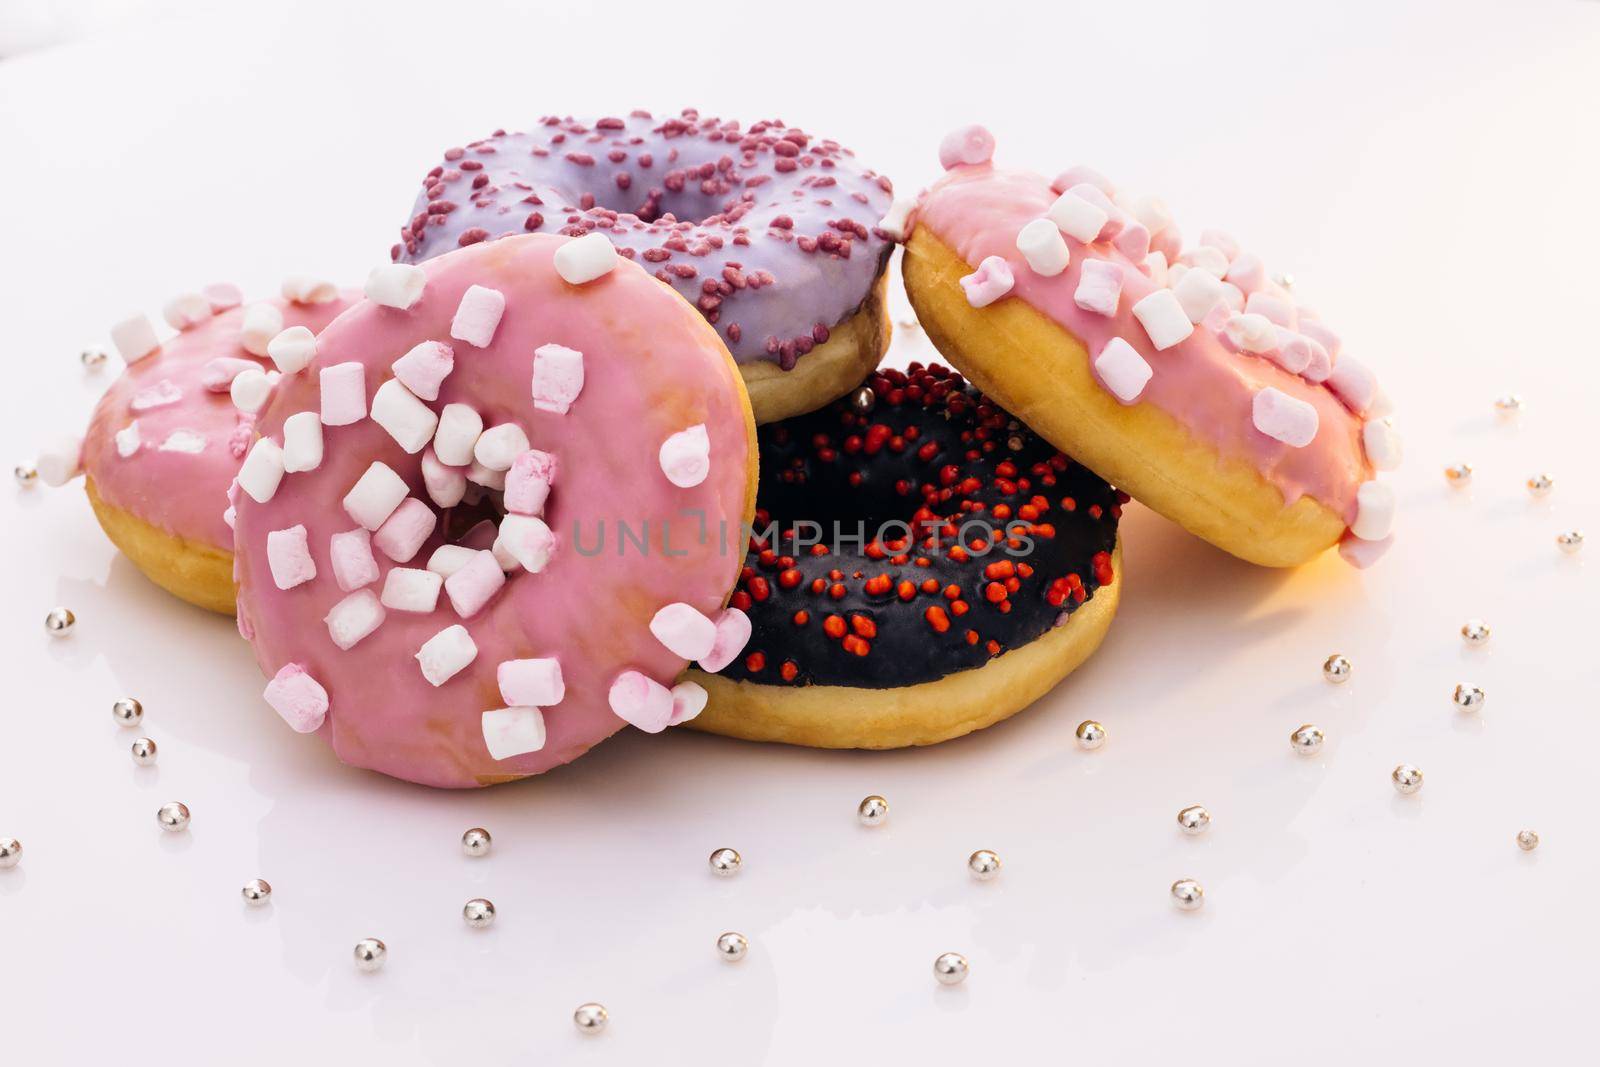 Donuts of white background. concept art. Donuts of different colors. Glazed sweet desserts. Fast food, Bakery concept. Various colorful donuts. Chocolate, purple, pink donuts